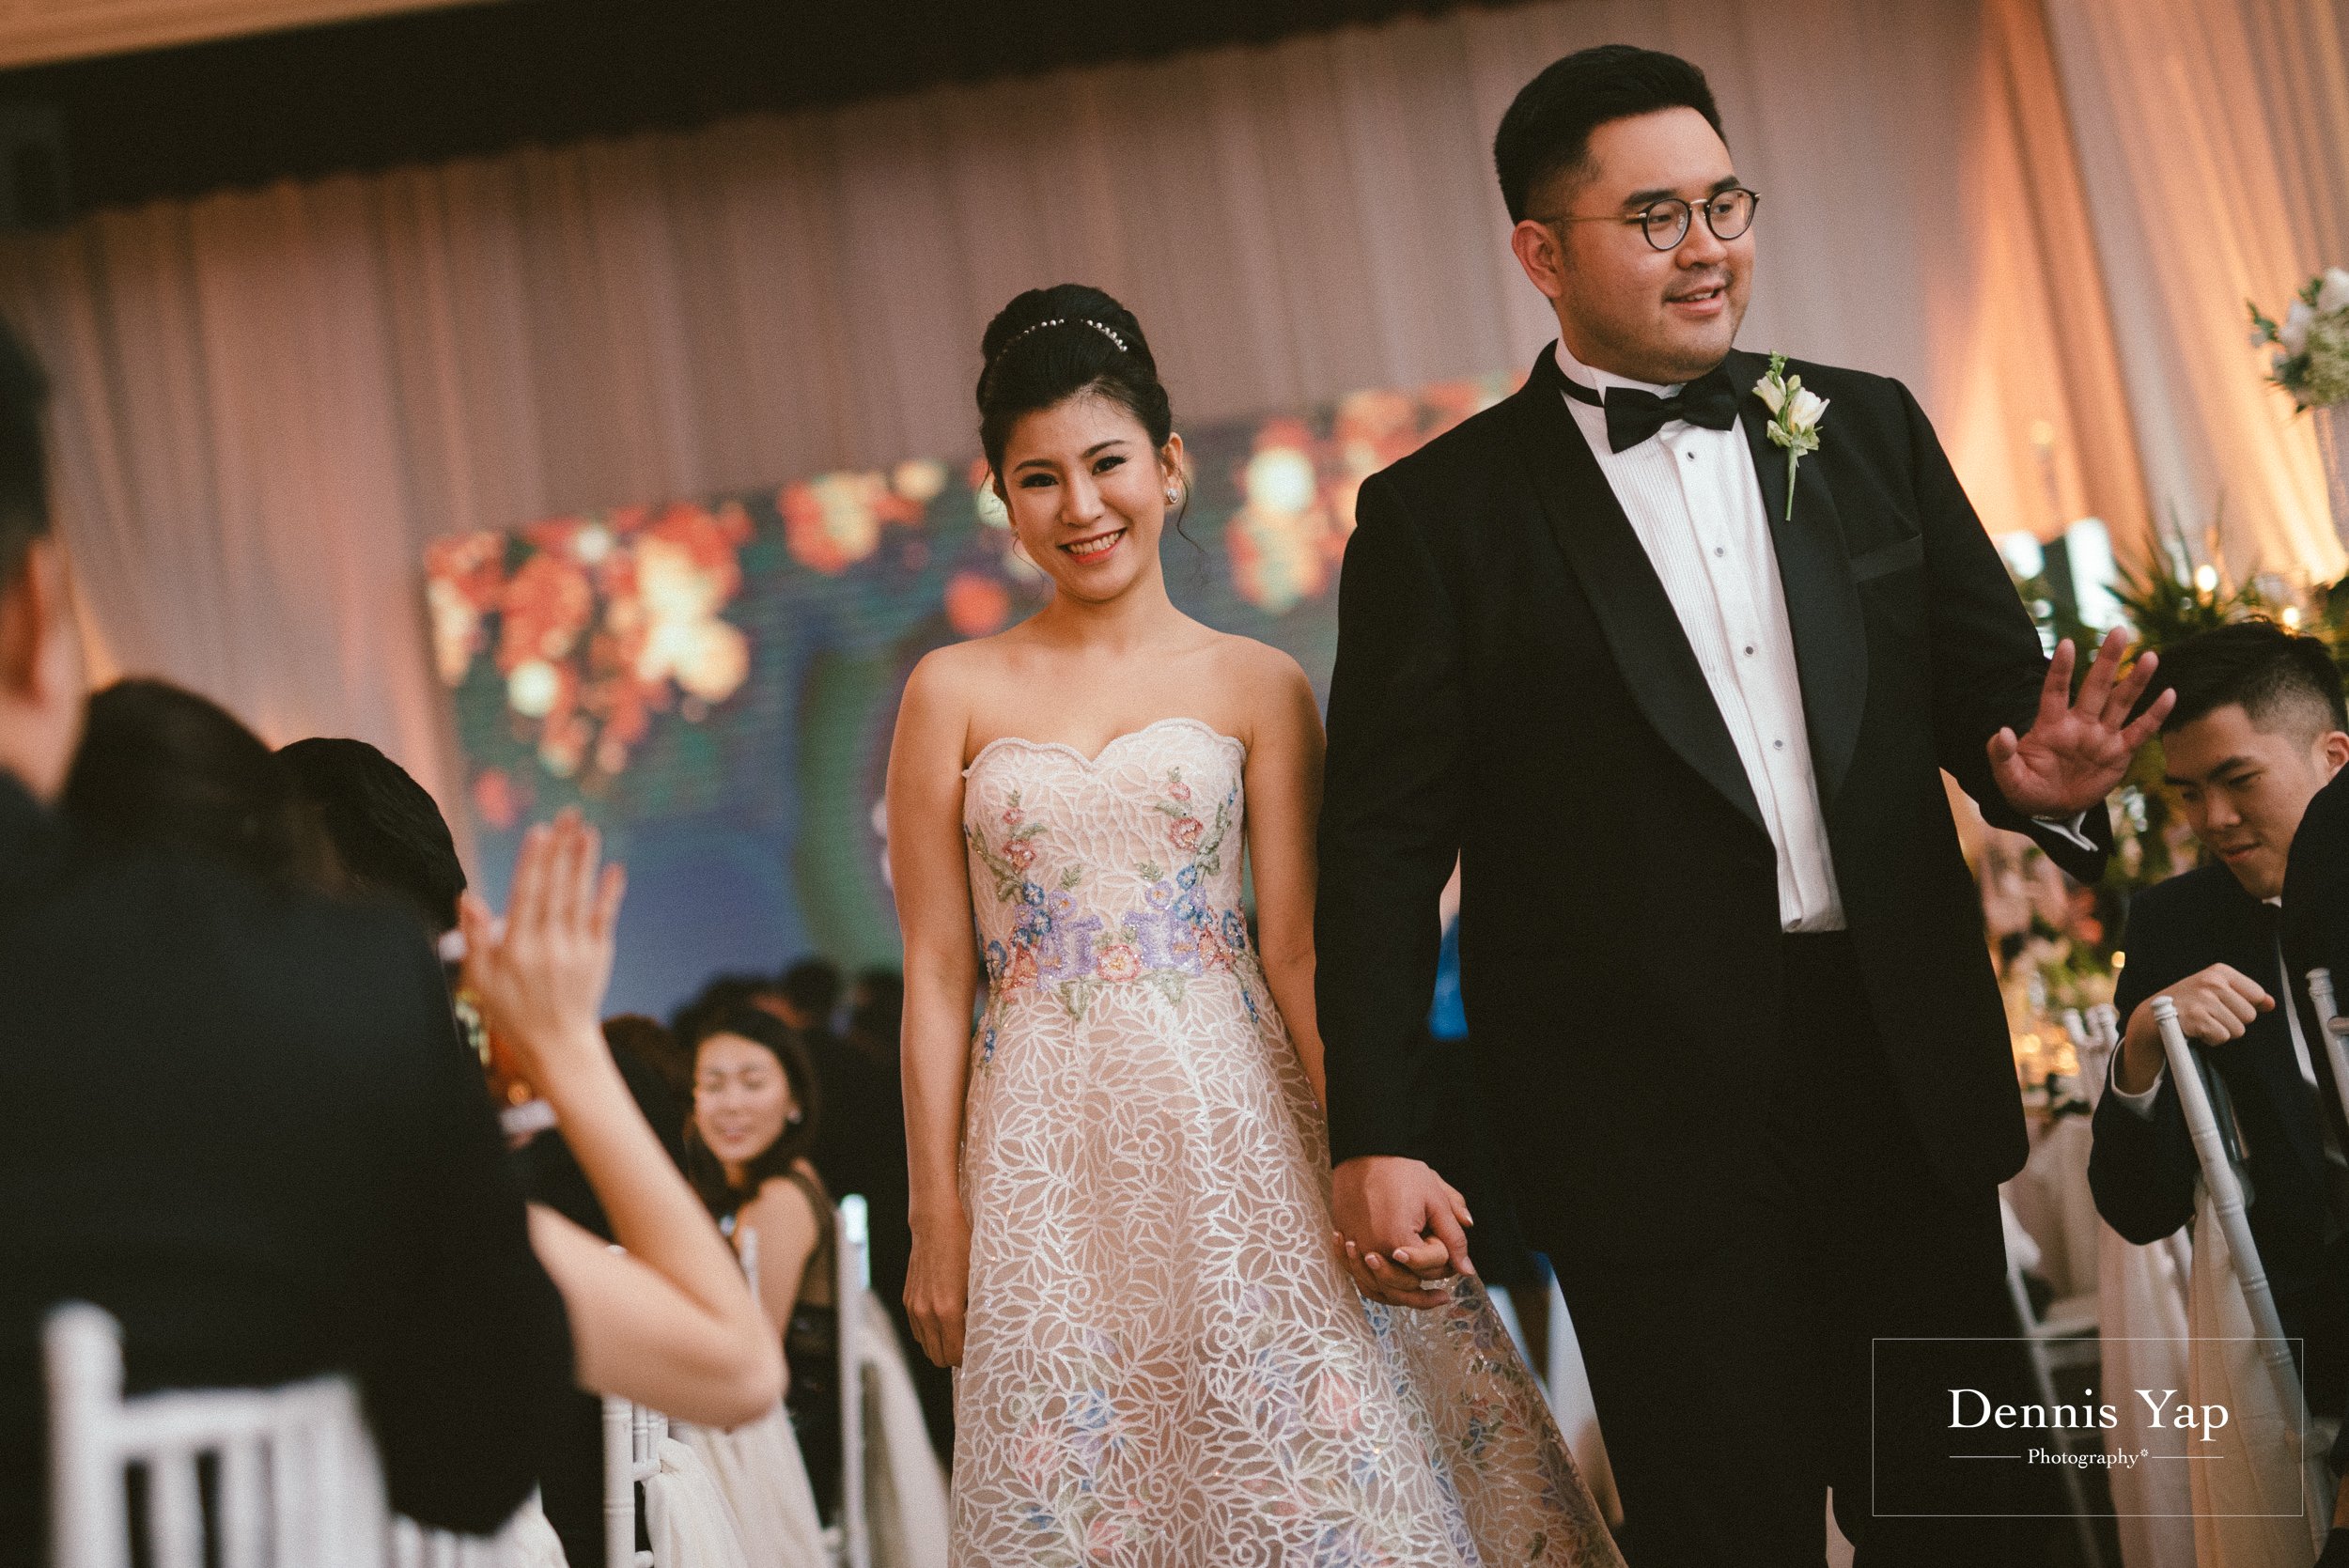 beng seong caring E and O hotel the occasion wedding planner awesome decoration dennis yap photography malaysia top wedding photographer-21.jpg